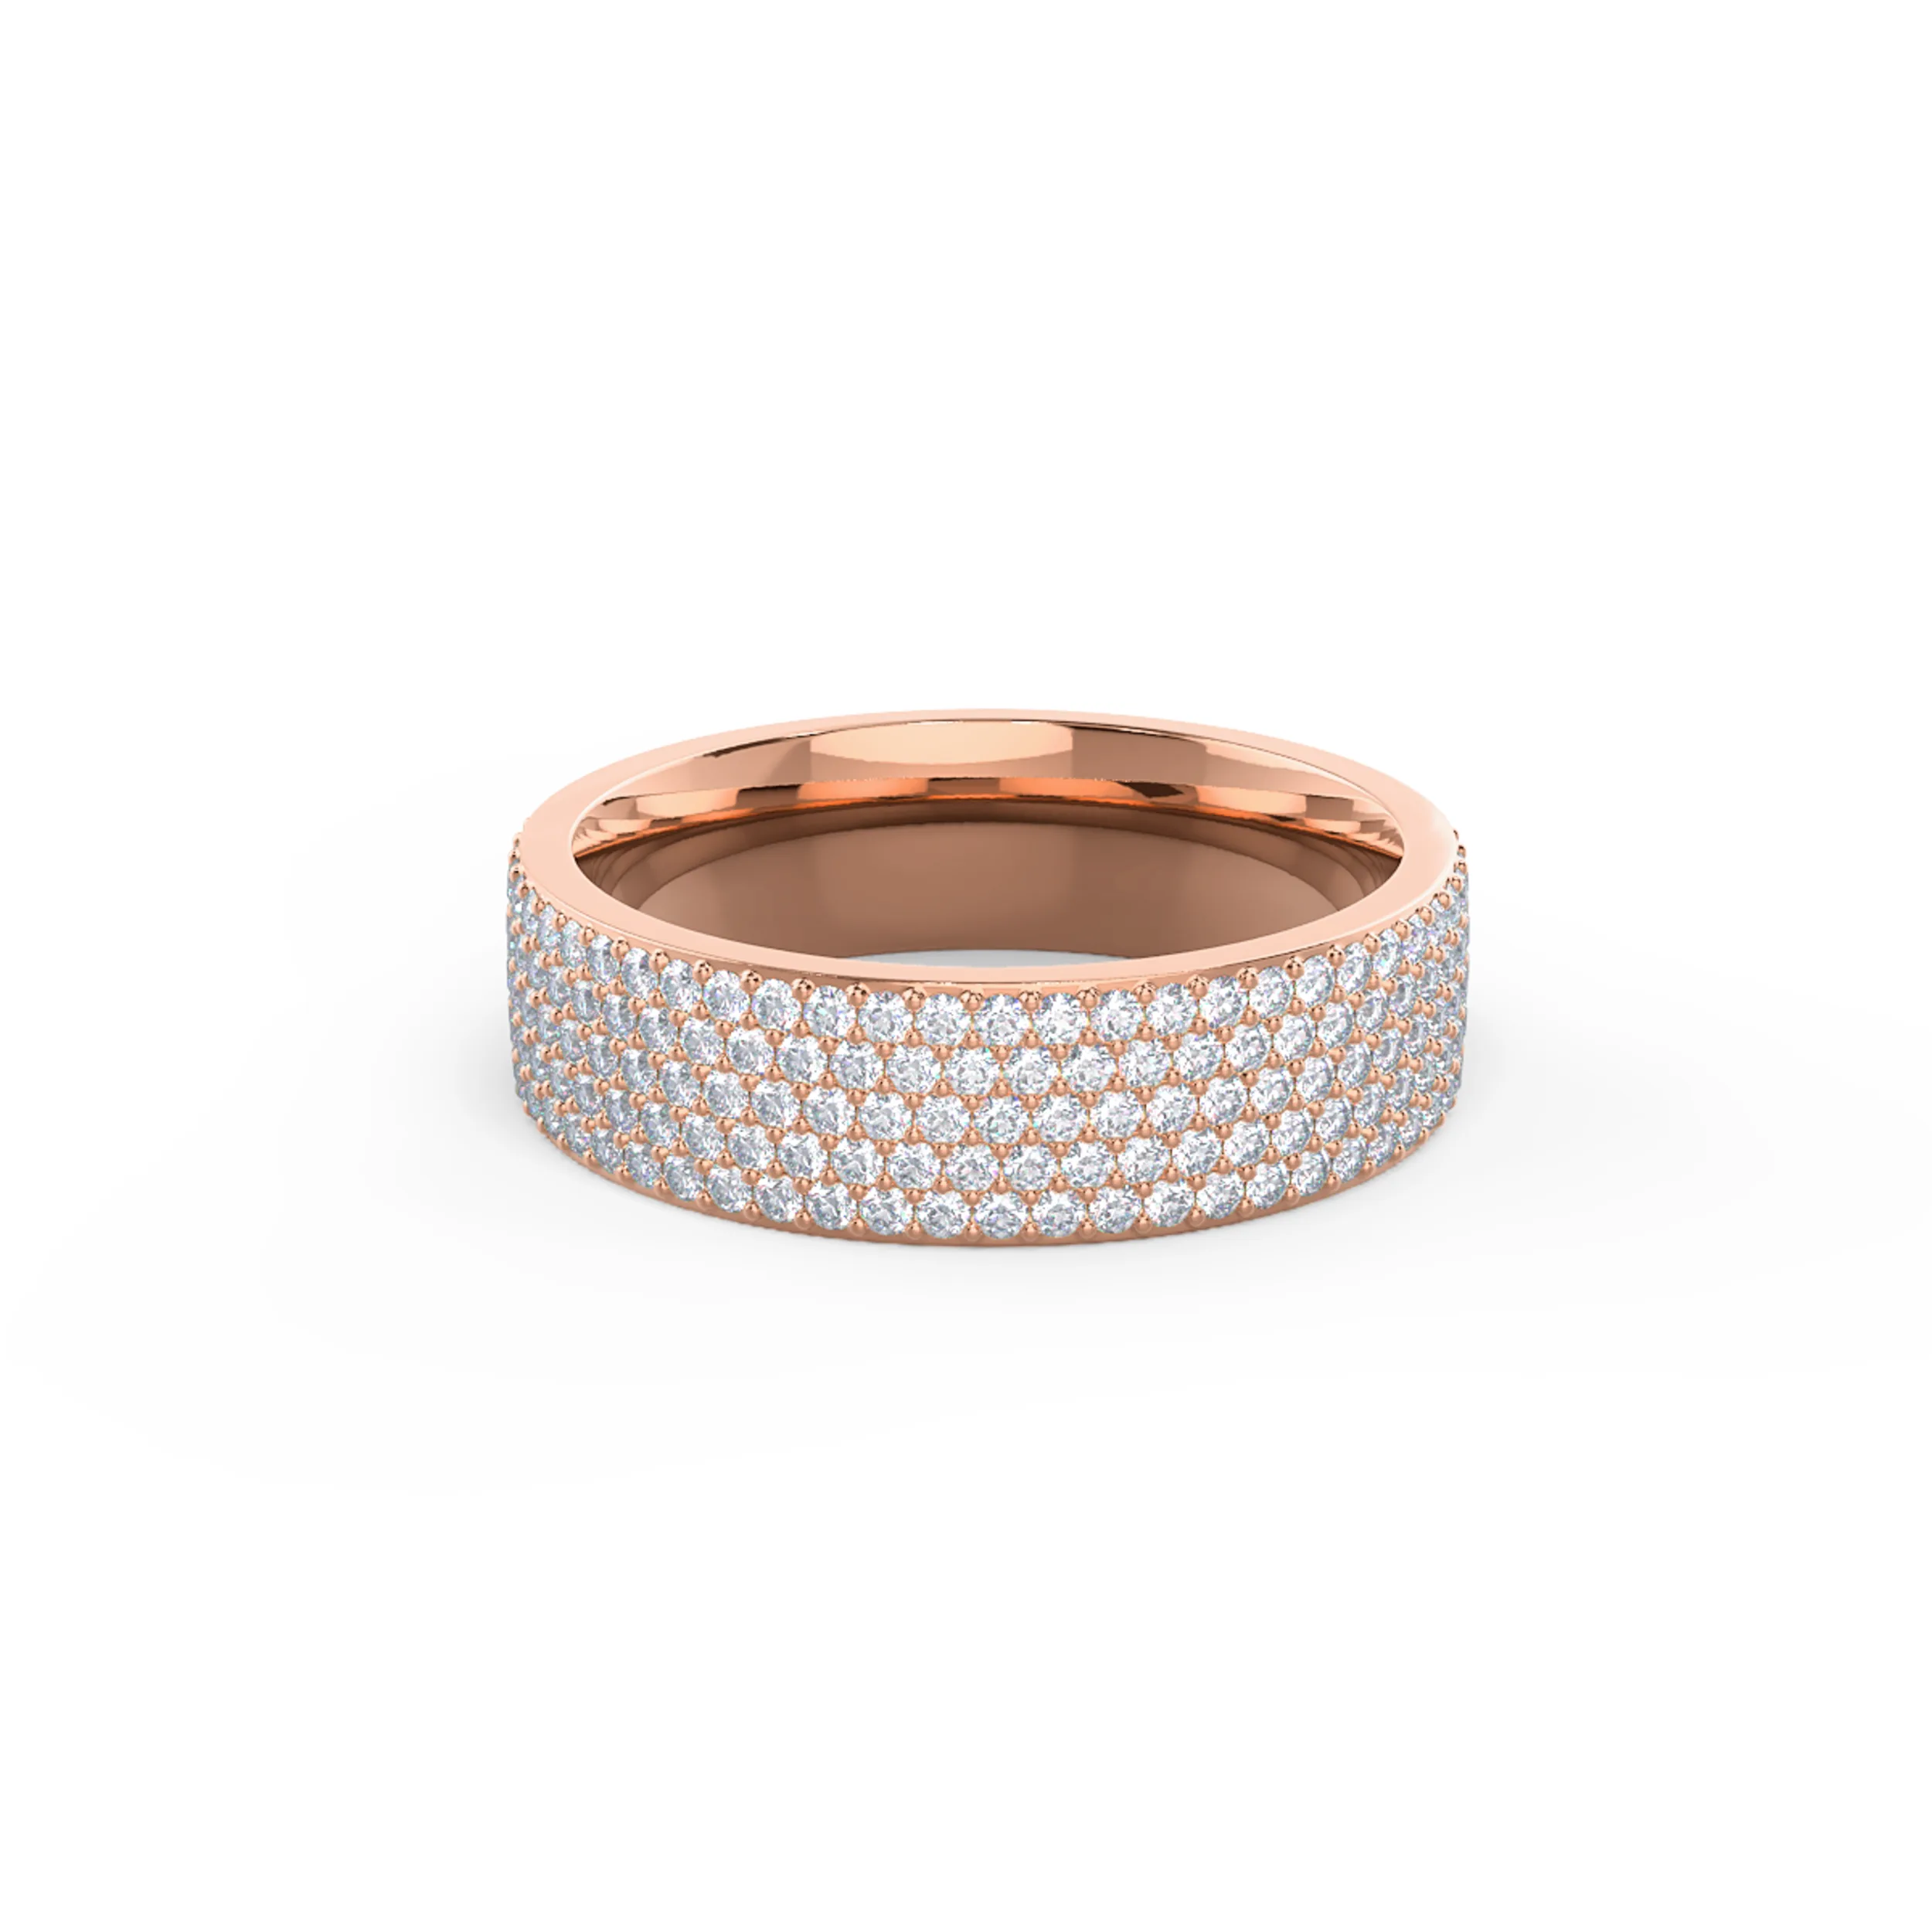 Exceptional Quality 1.0 ct Round Brilliant Lab Diamonds Five Row Pavé Three Quarter Band in 14kt Rose Gold (Main View)